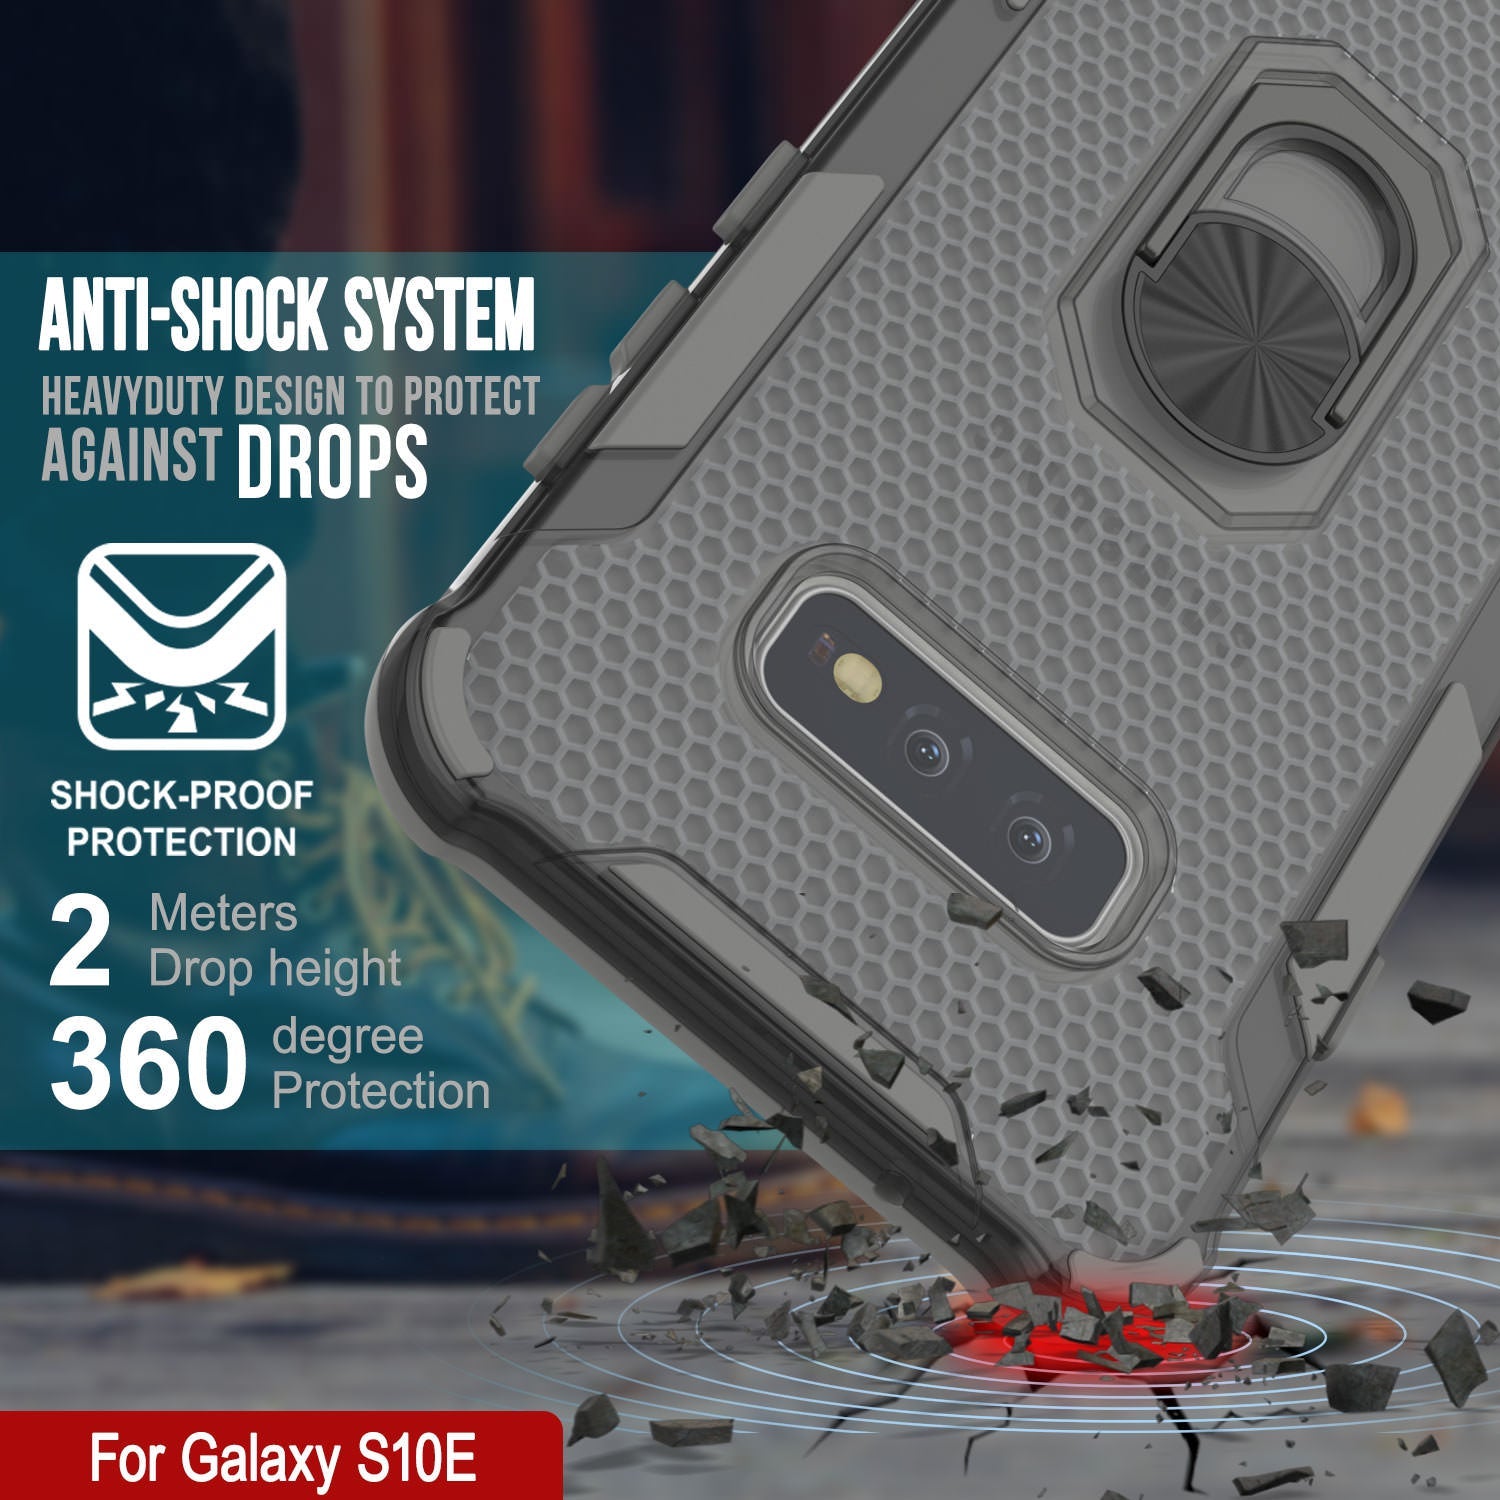 Punkcase Galaxy S10e Case [Magnetix 2.0 Series] Clear Protective TPU Cover W/Kickstand [Grey]